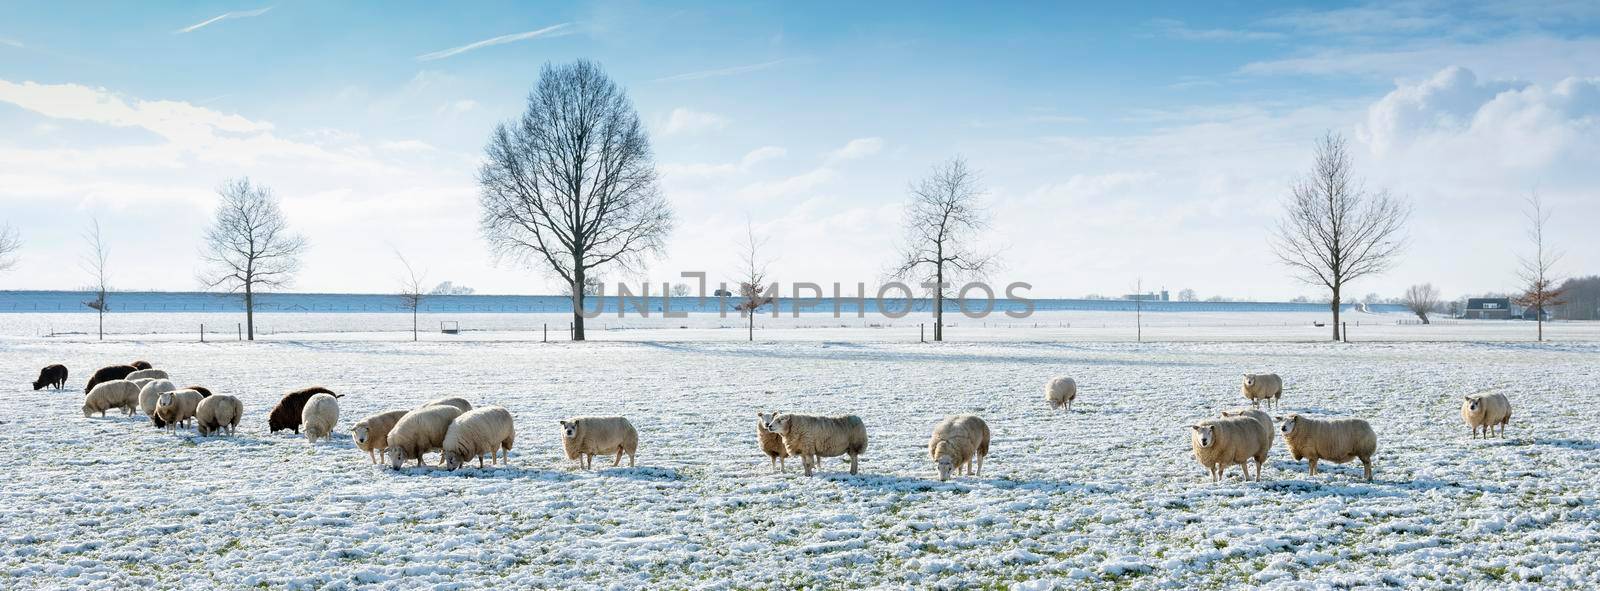 sheep in dutch meadow with snow and trees in the netherlands under blue sky and clouds